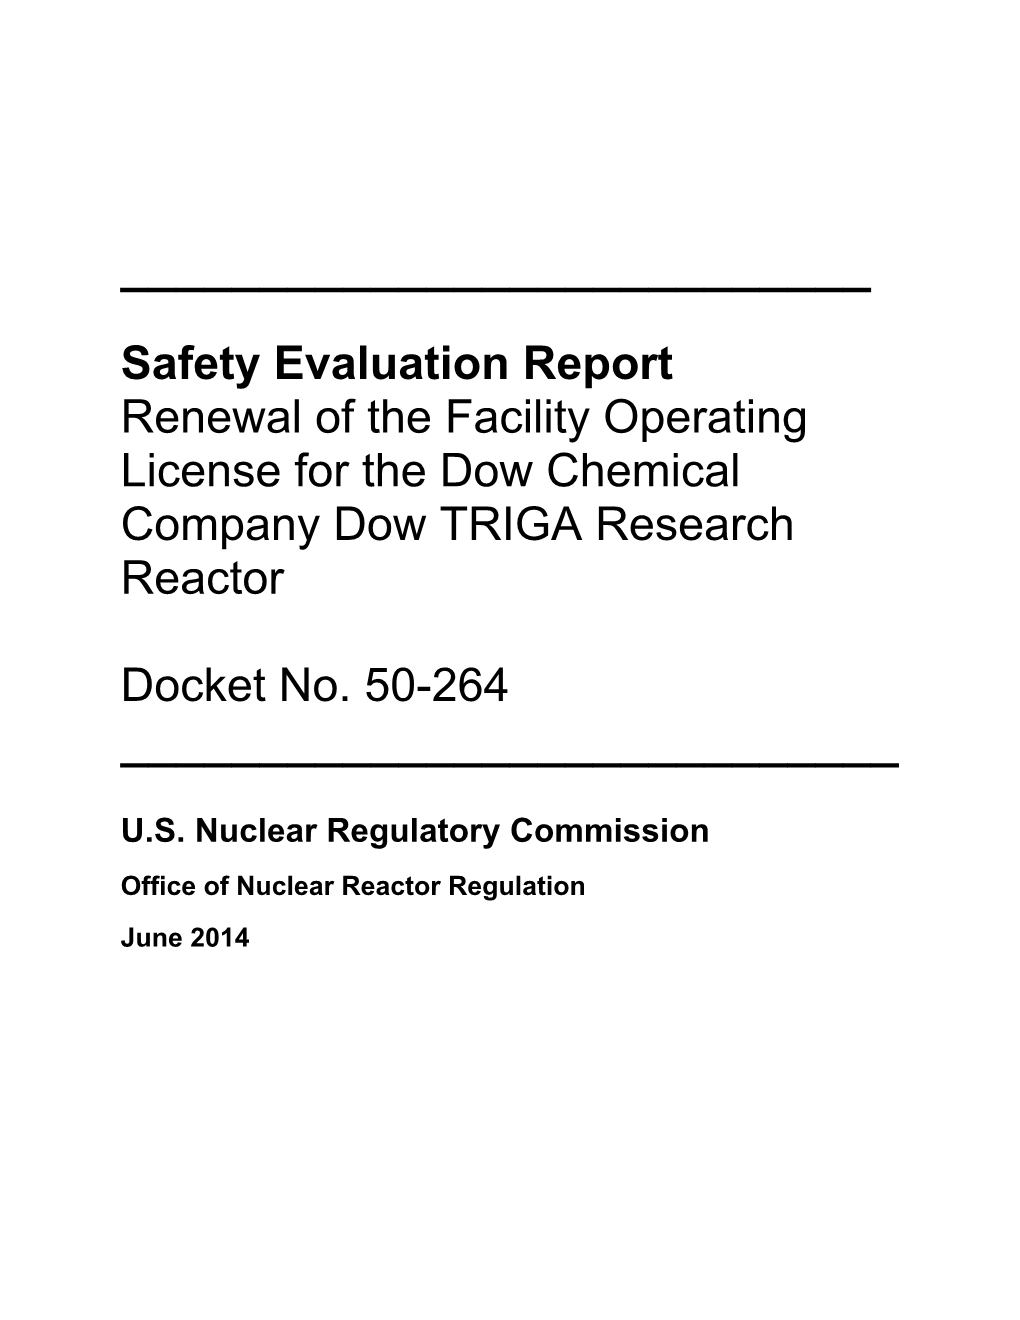 Safety Evaluation Report Renewal of the Facility Operating License for the Dow Chemical Company Dow TRIGA Research Reactor